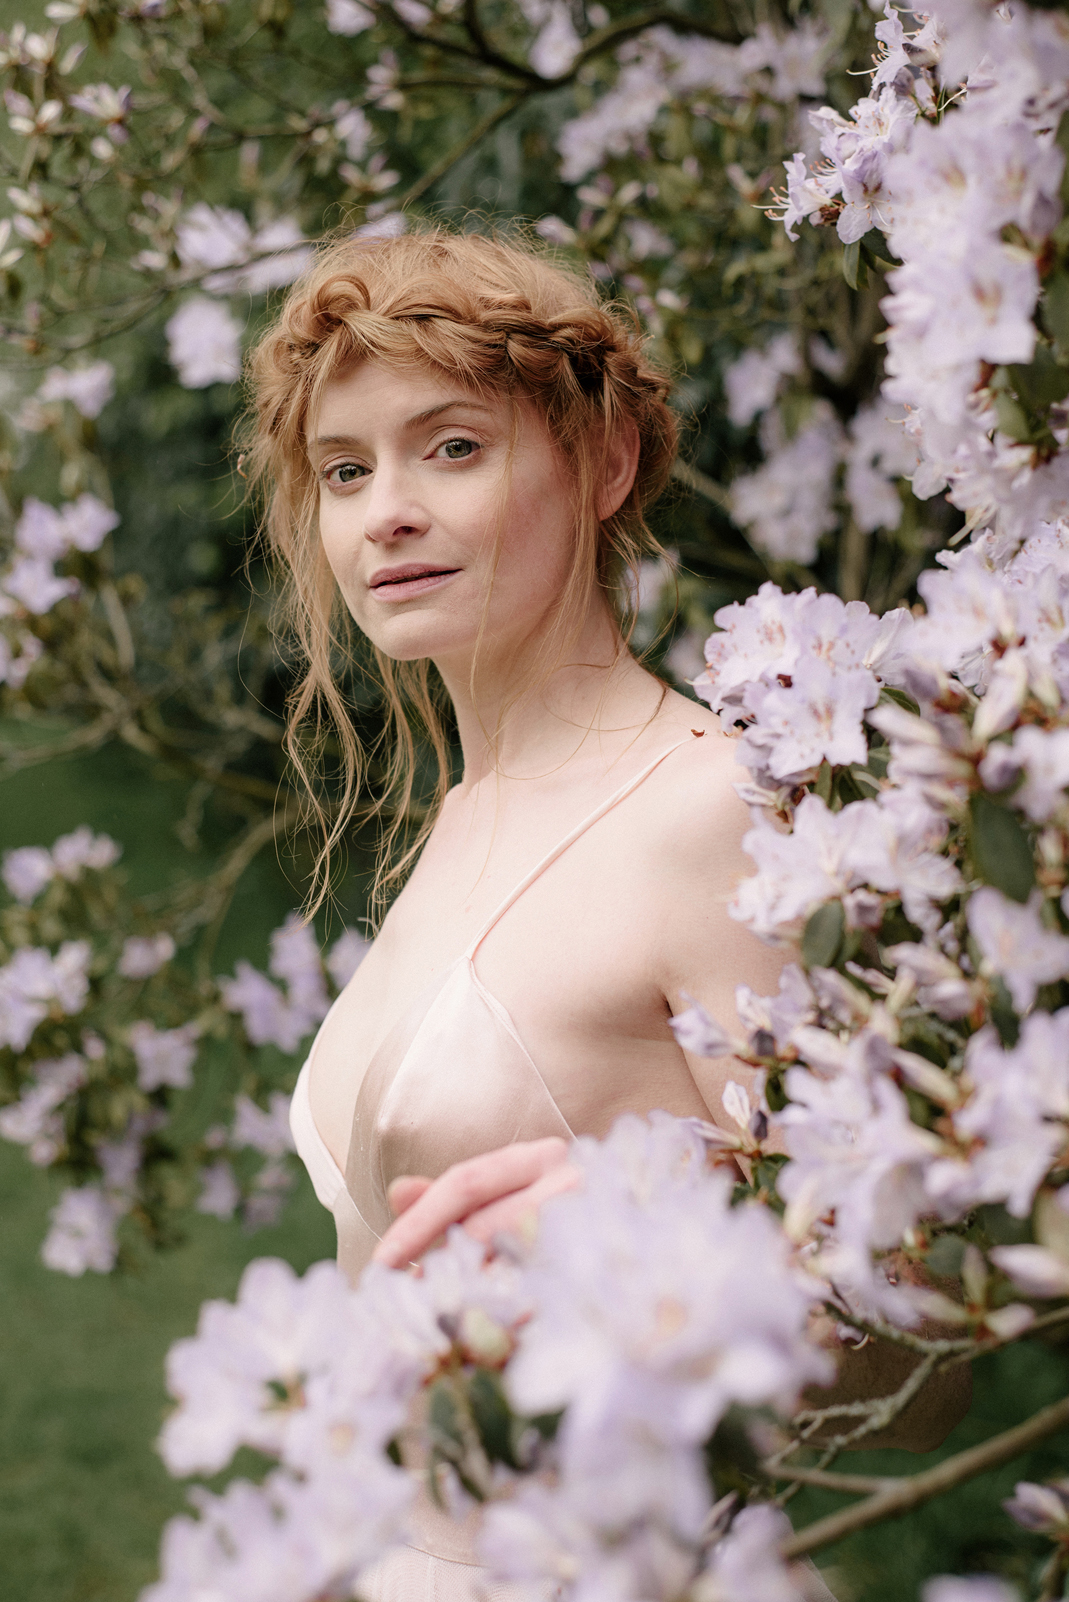 29 Dreamy pale pink wedding dress and mother earth inspired editorial